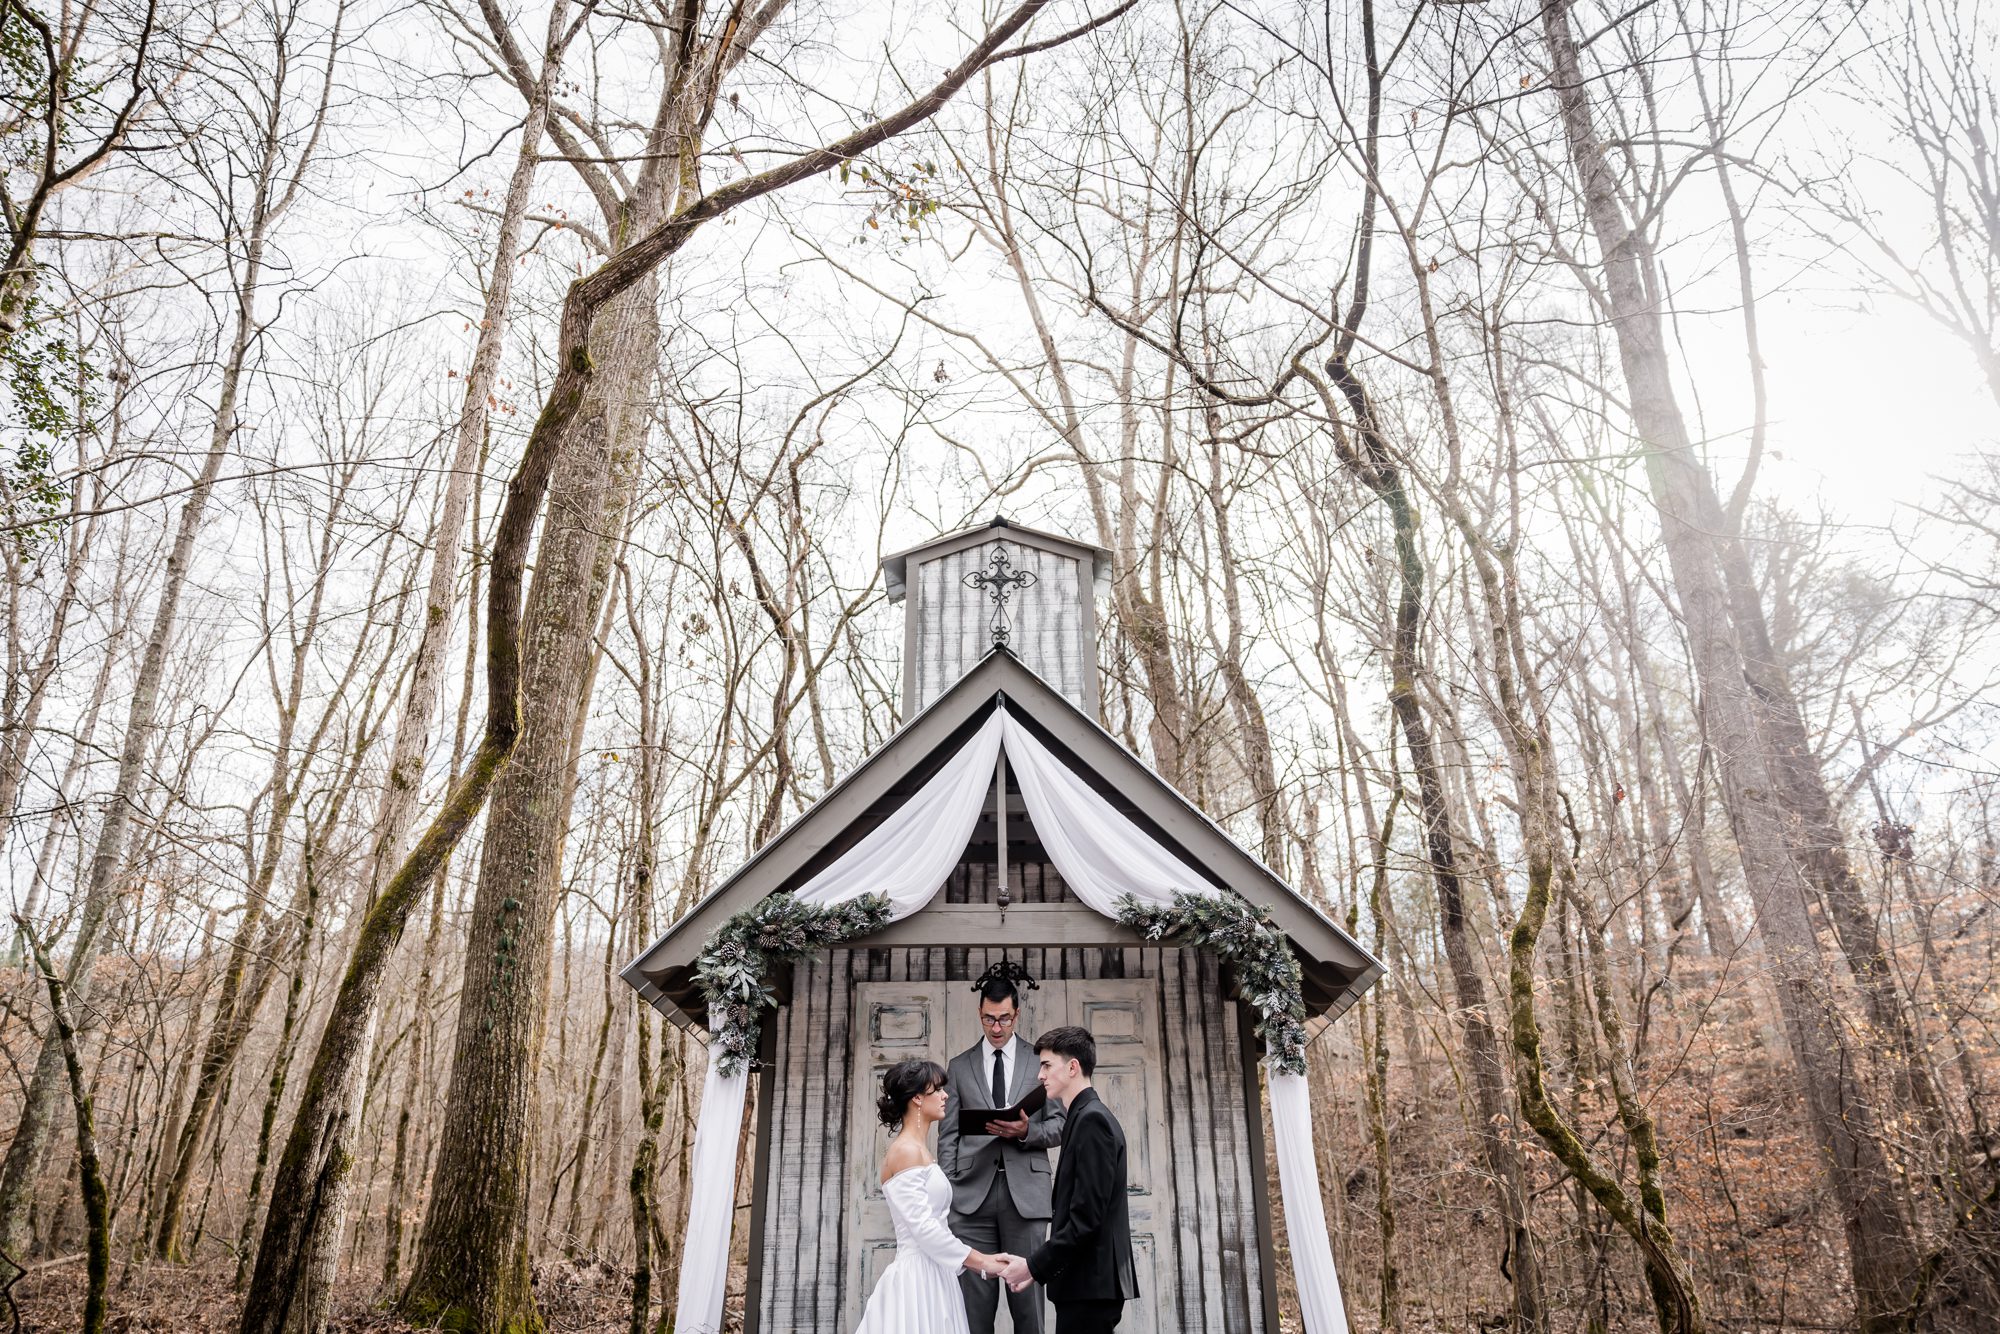 Little Wedding in the Smoky Mountains